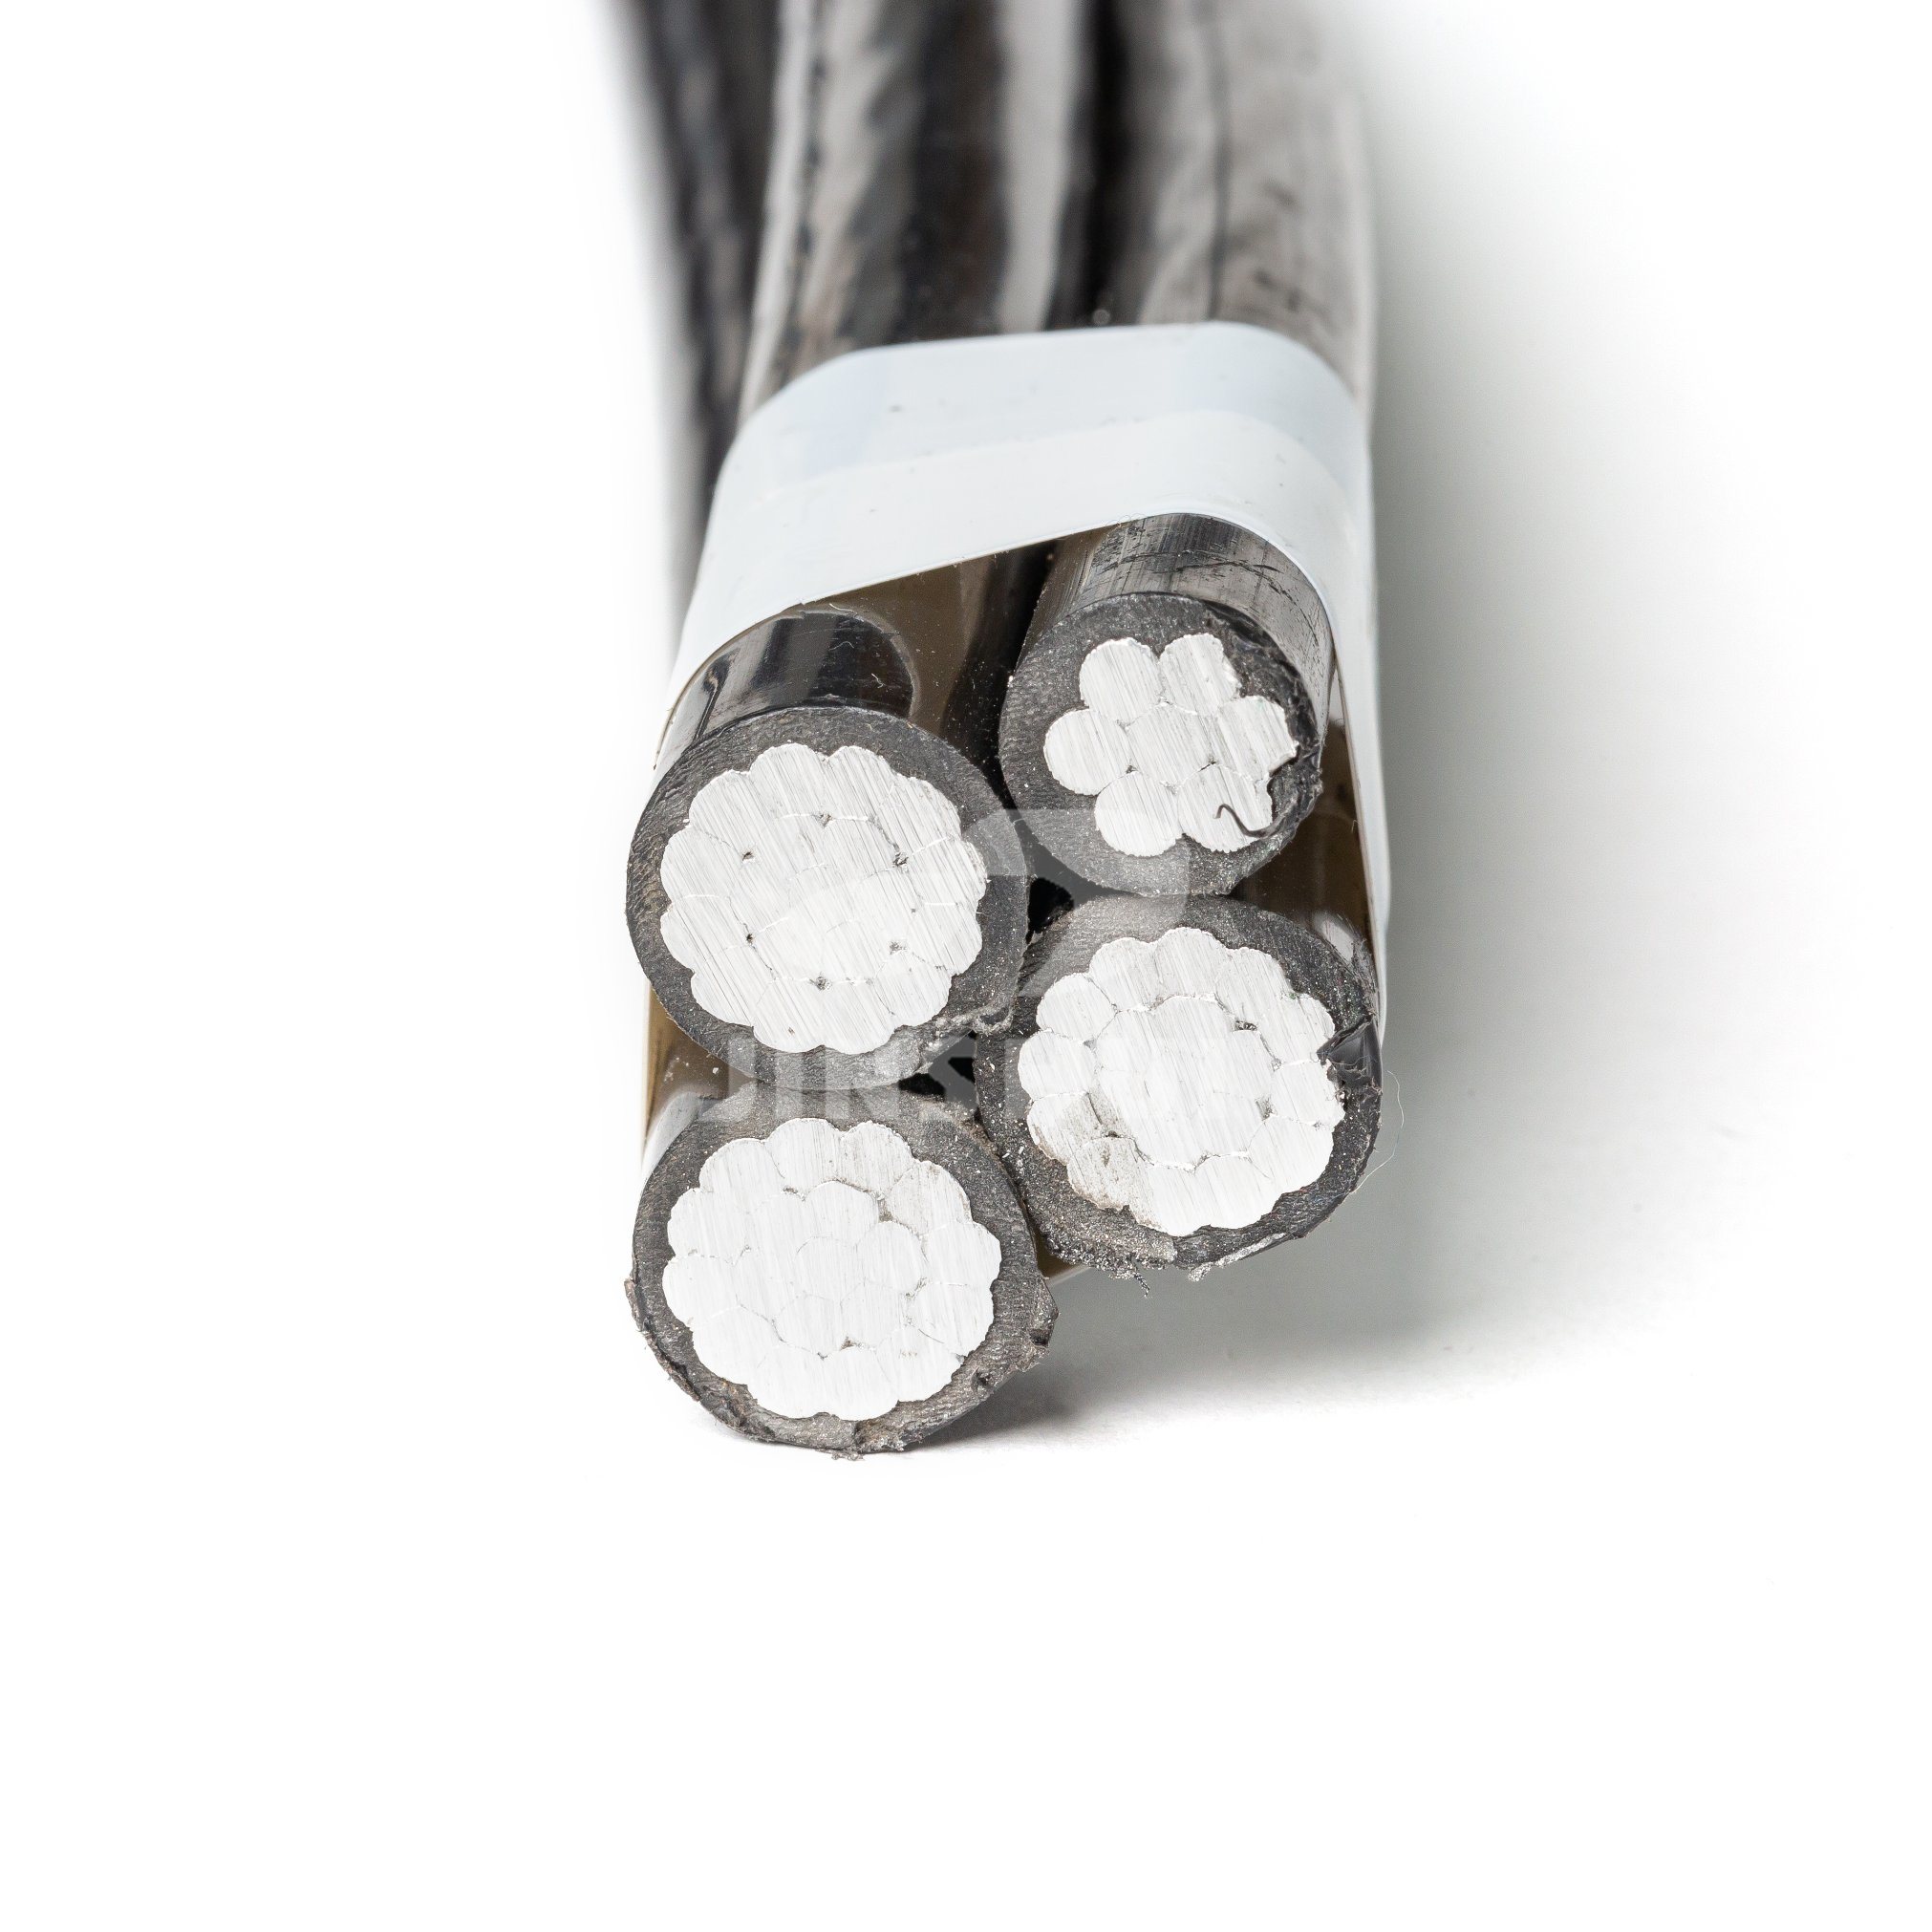 ABC Cable LV Aluminum Conductor Steel Core Power Cable Manufacturer